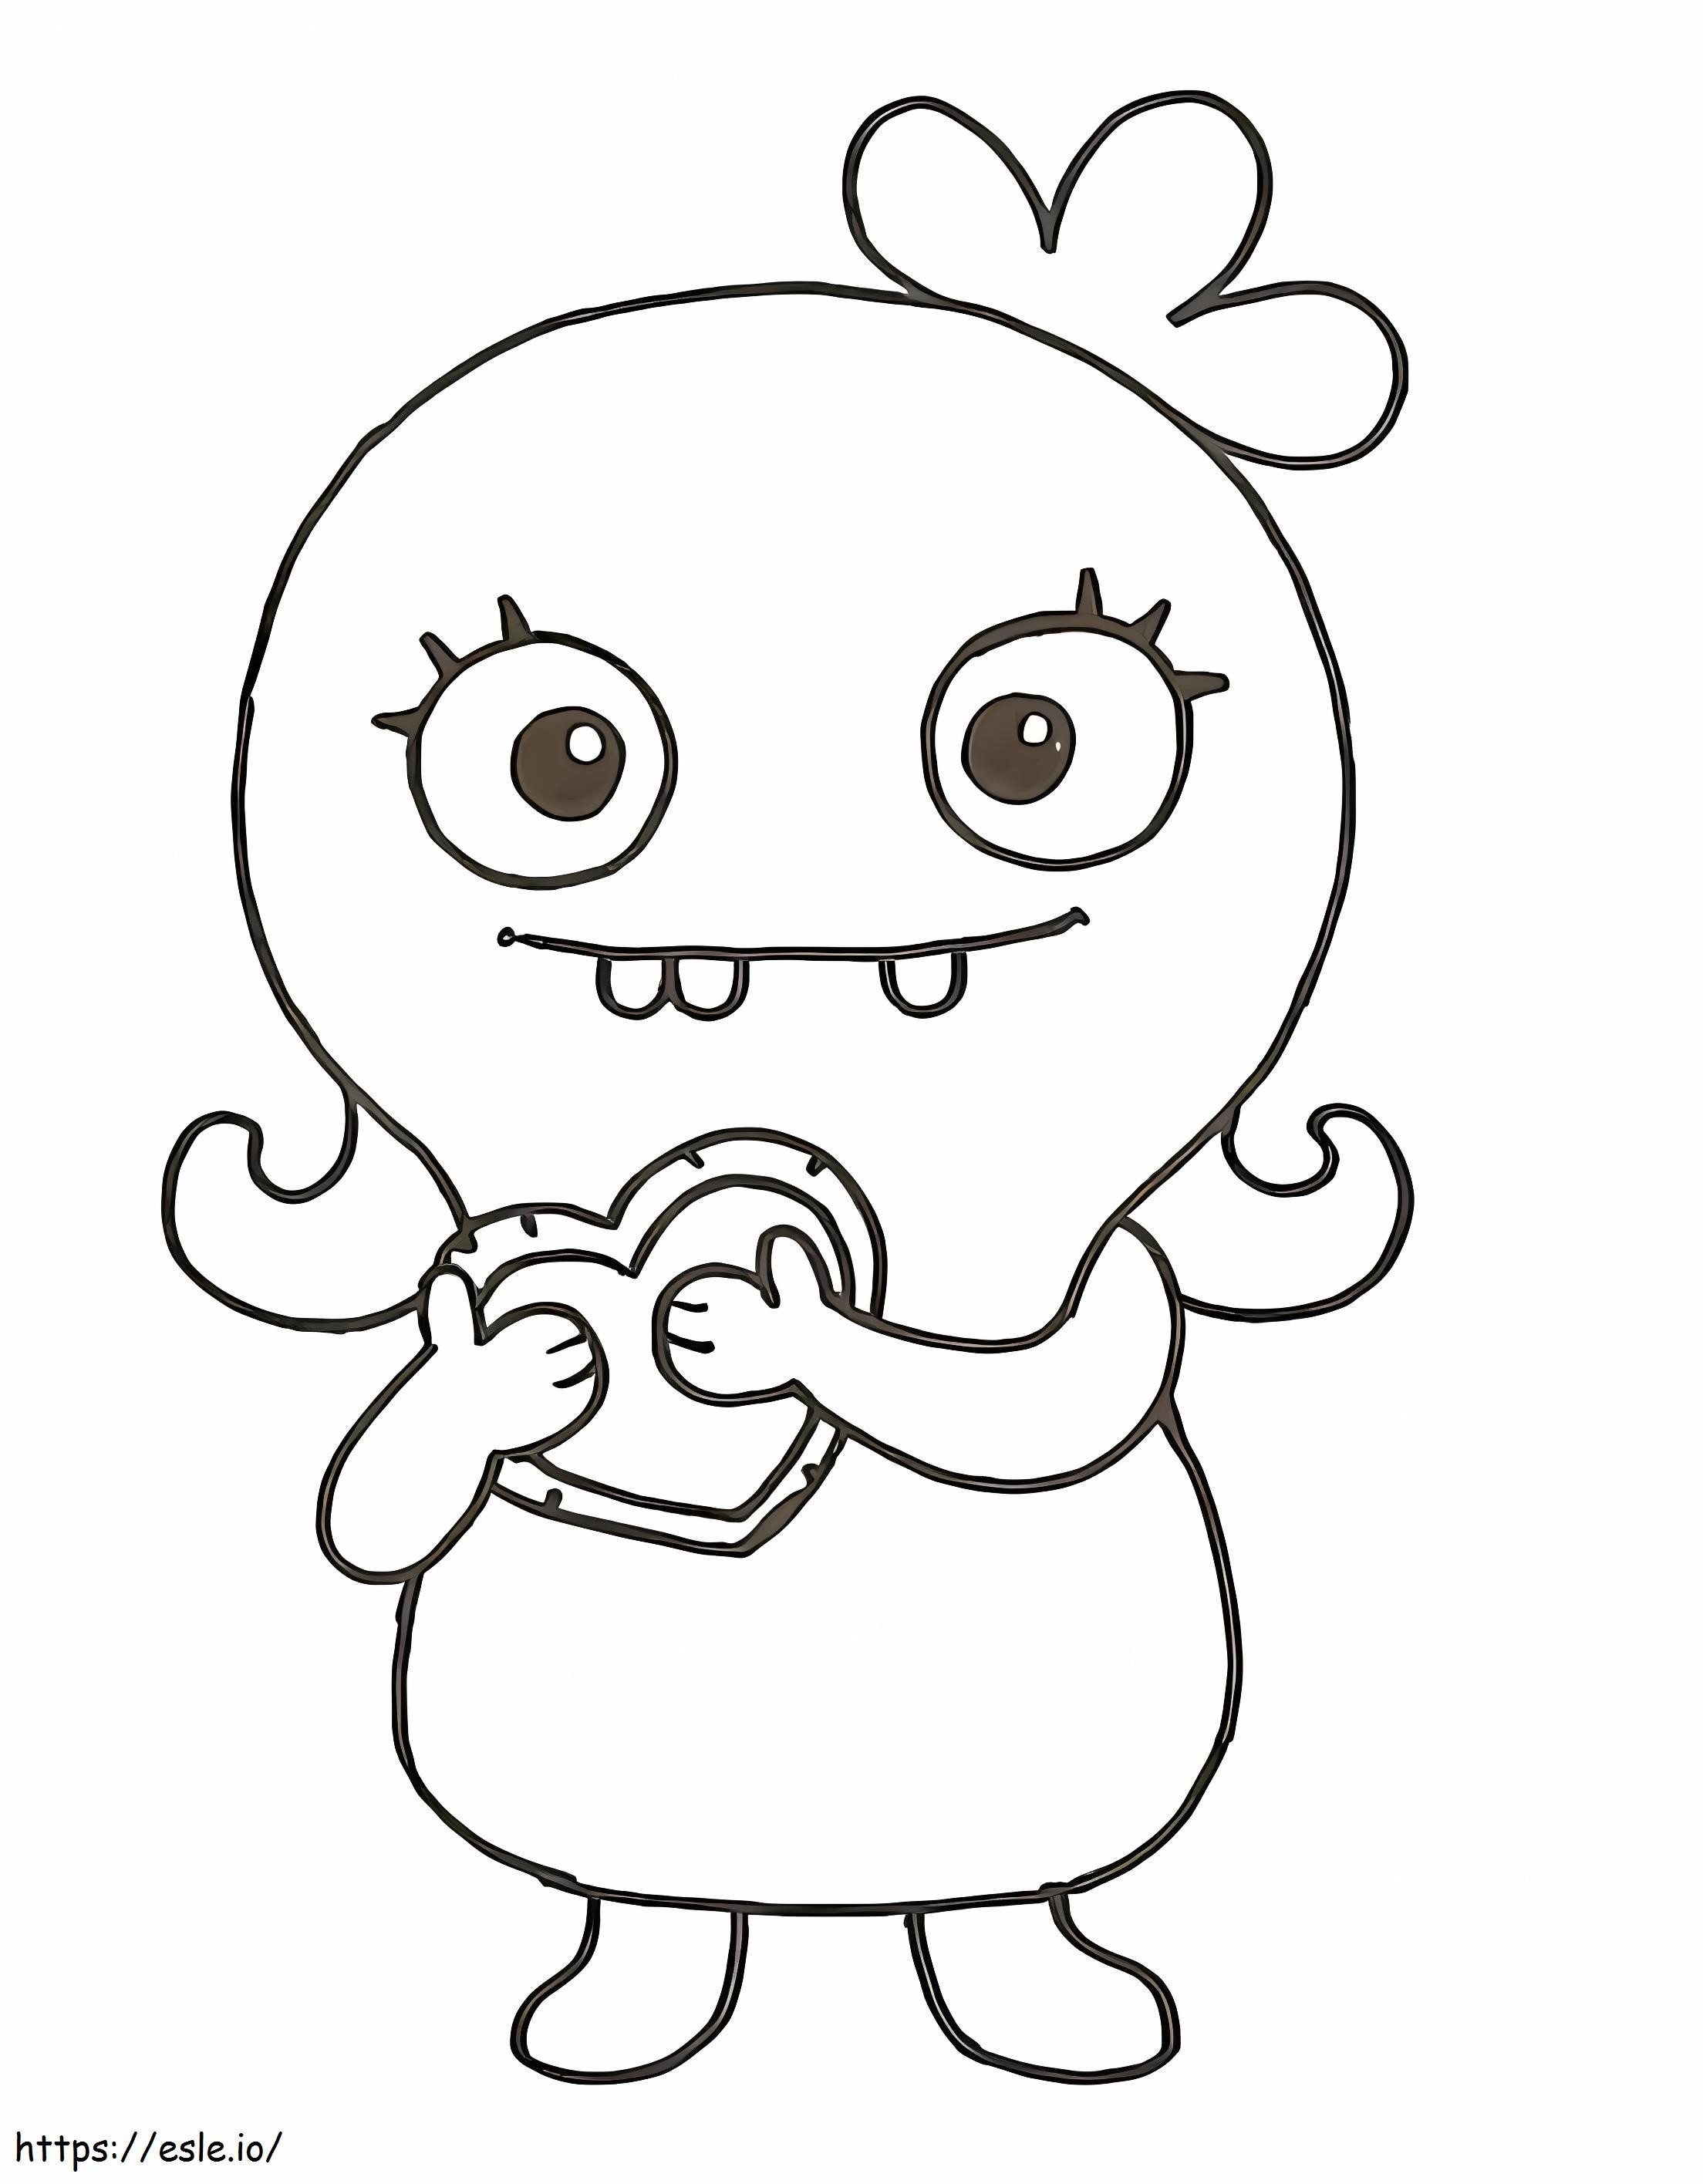 Cute Moxy UglyDolls coloring page